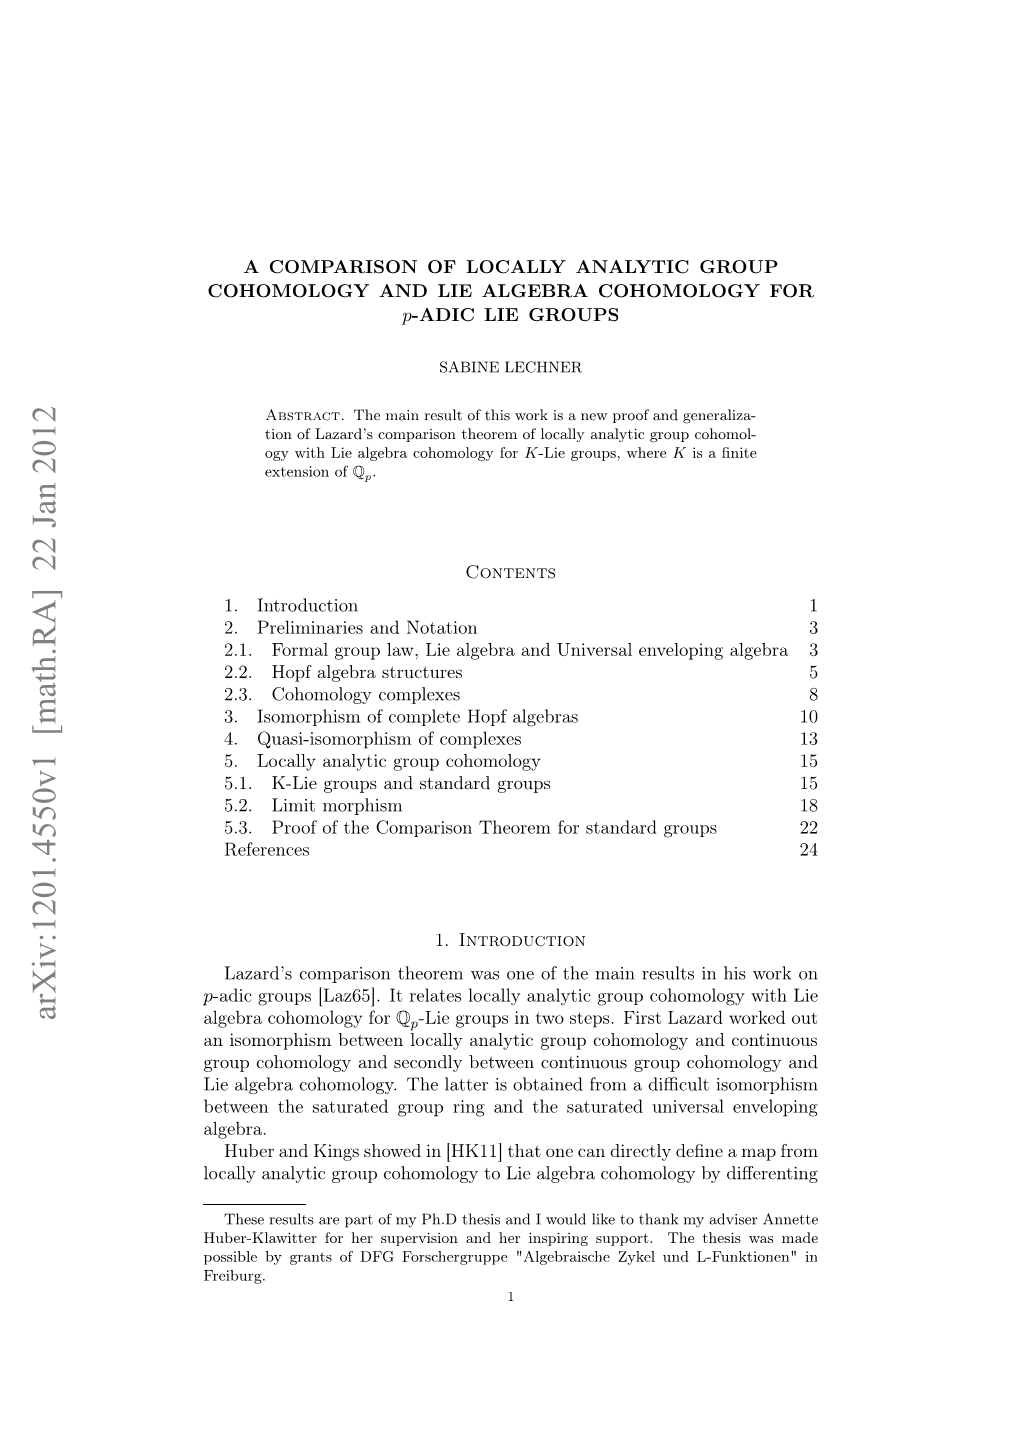 A Comparison of Locally Analytic Group Cohomology and Lie Algebra